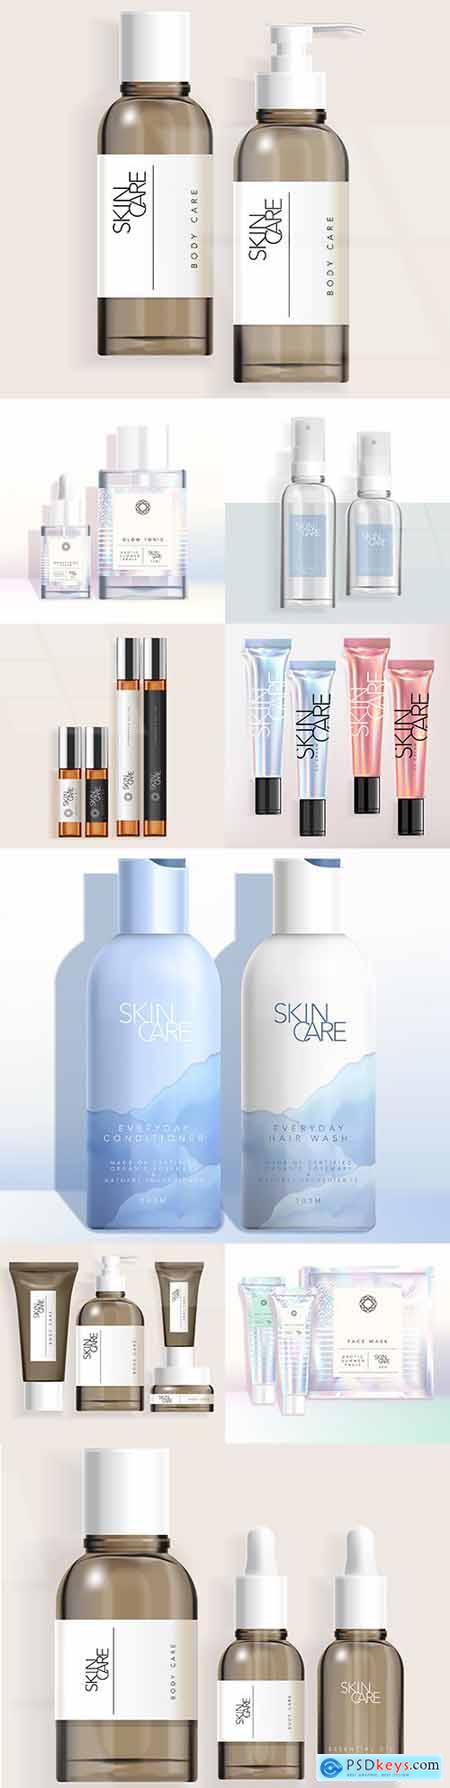 Skin care bottles and holographic rainbow packaging